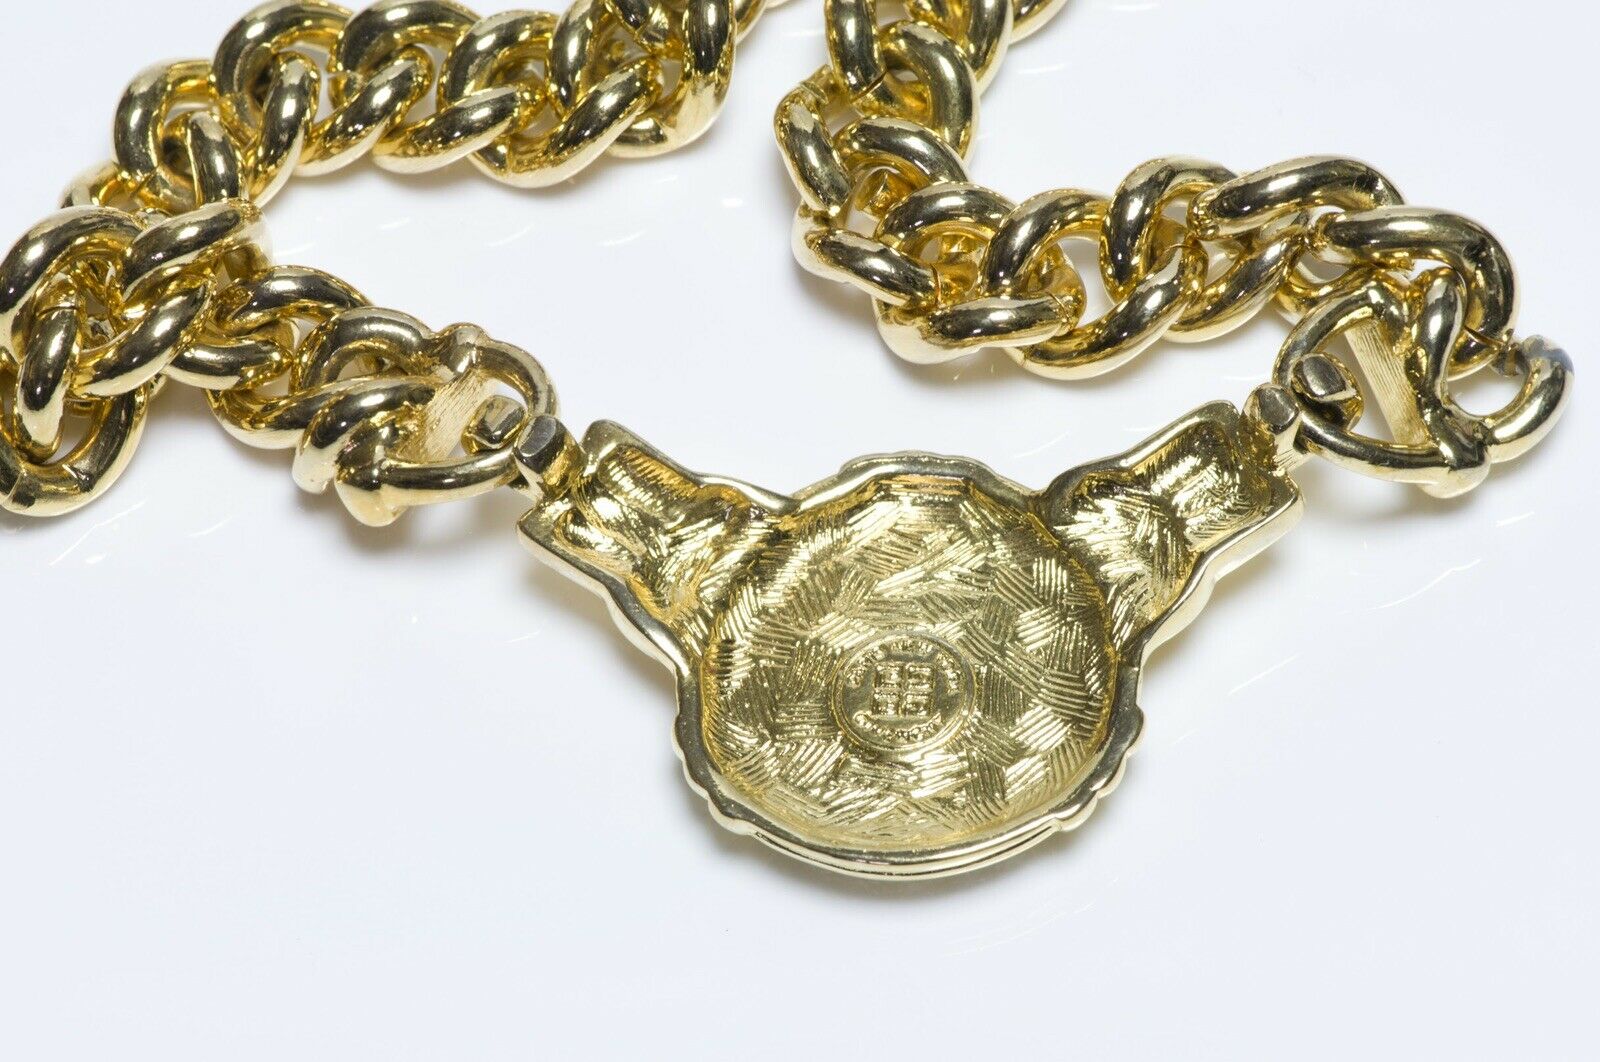 GIVENCHY Paris Crystal Coin Chain Necklace